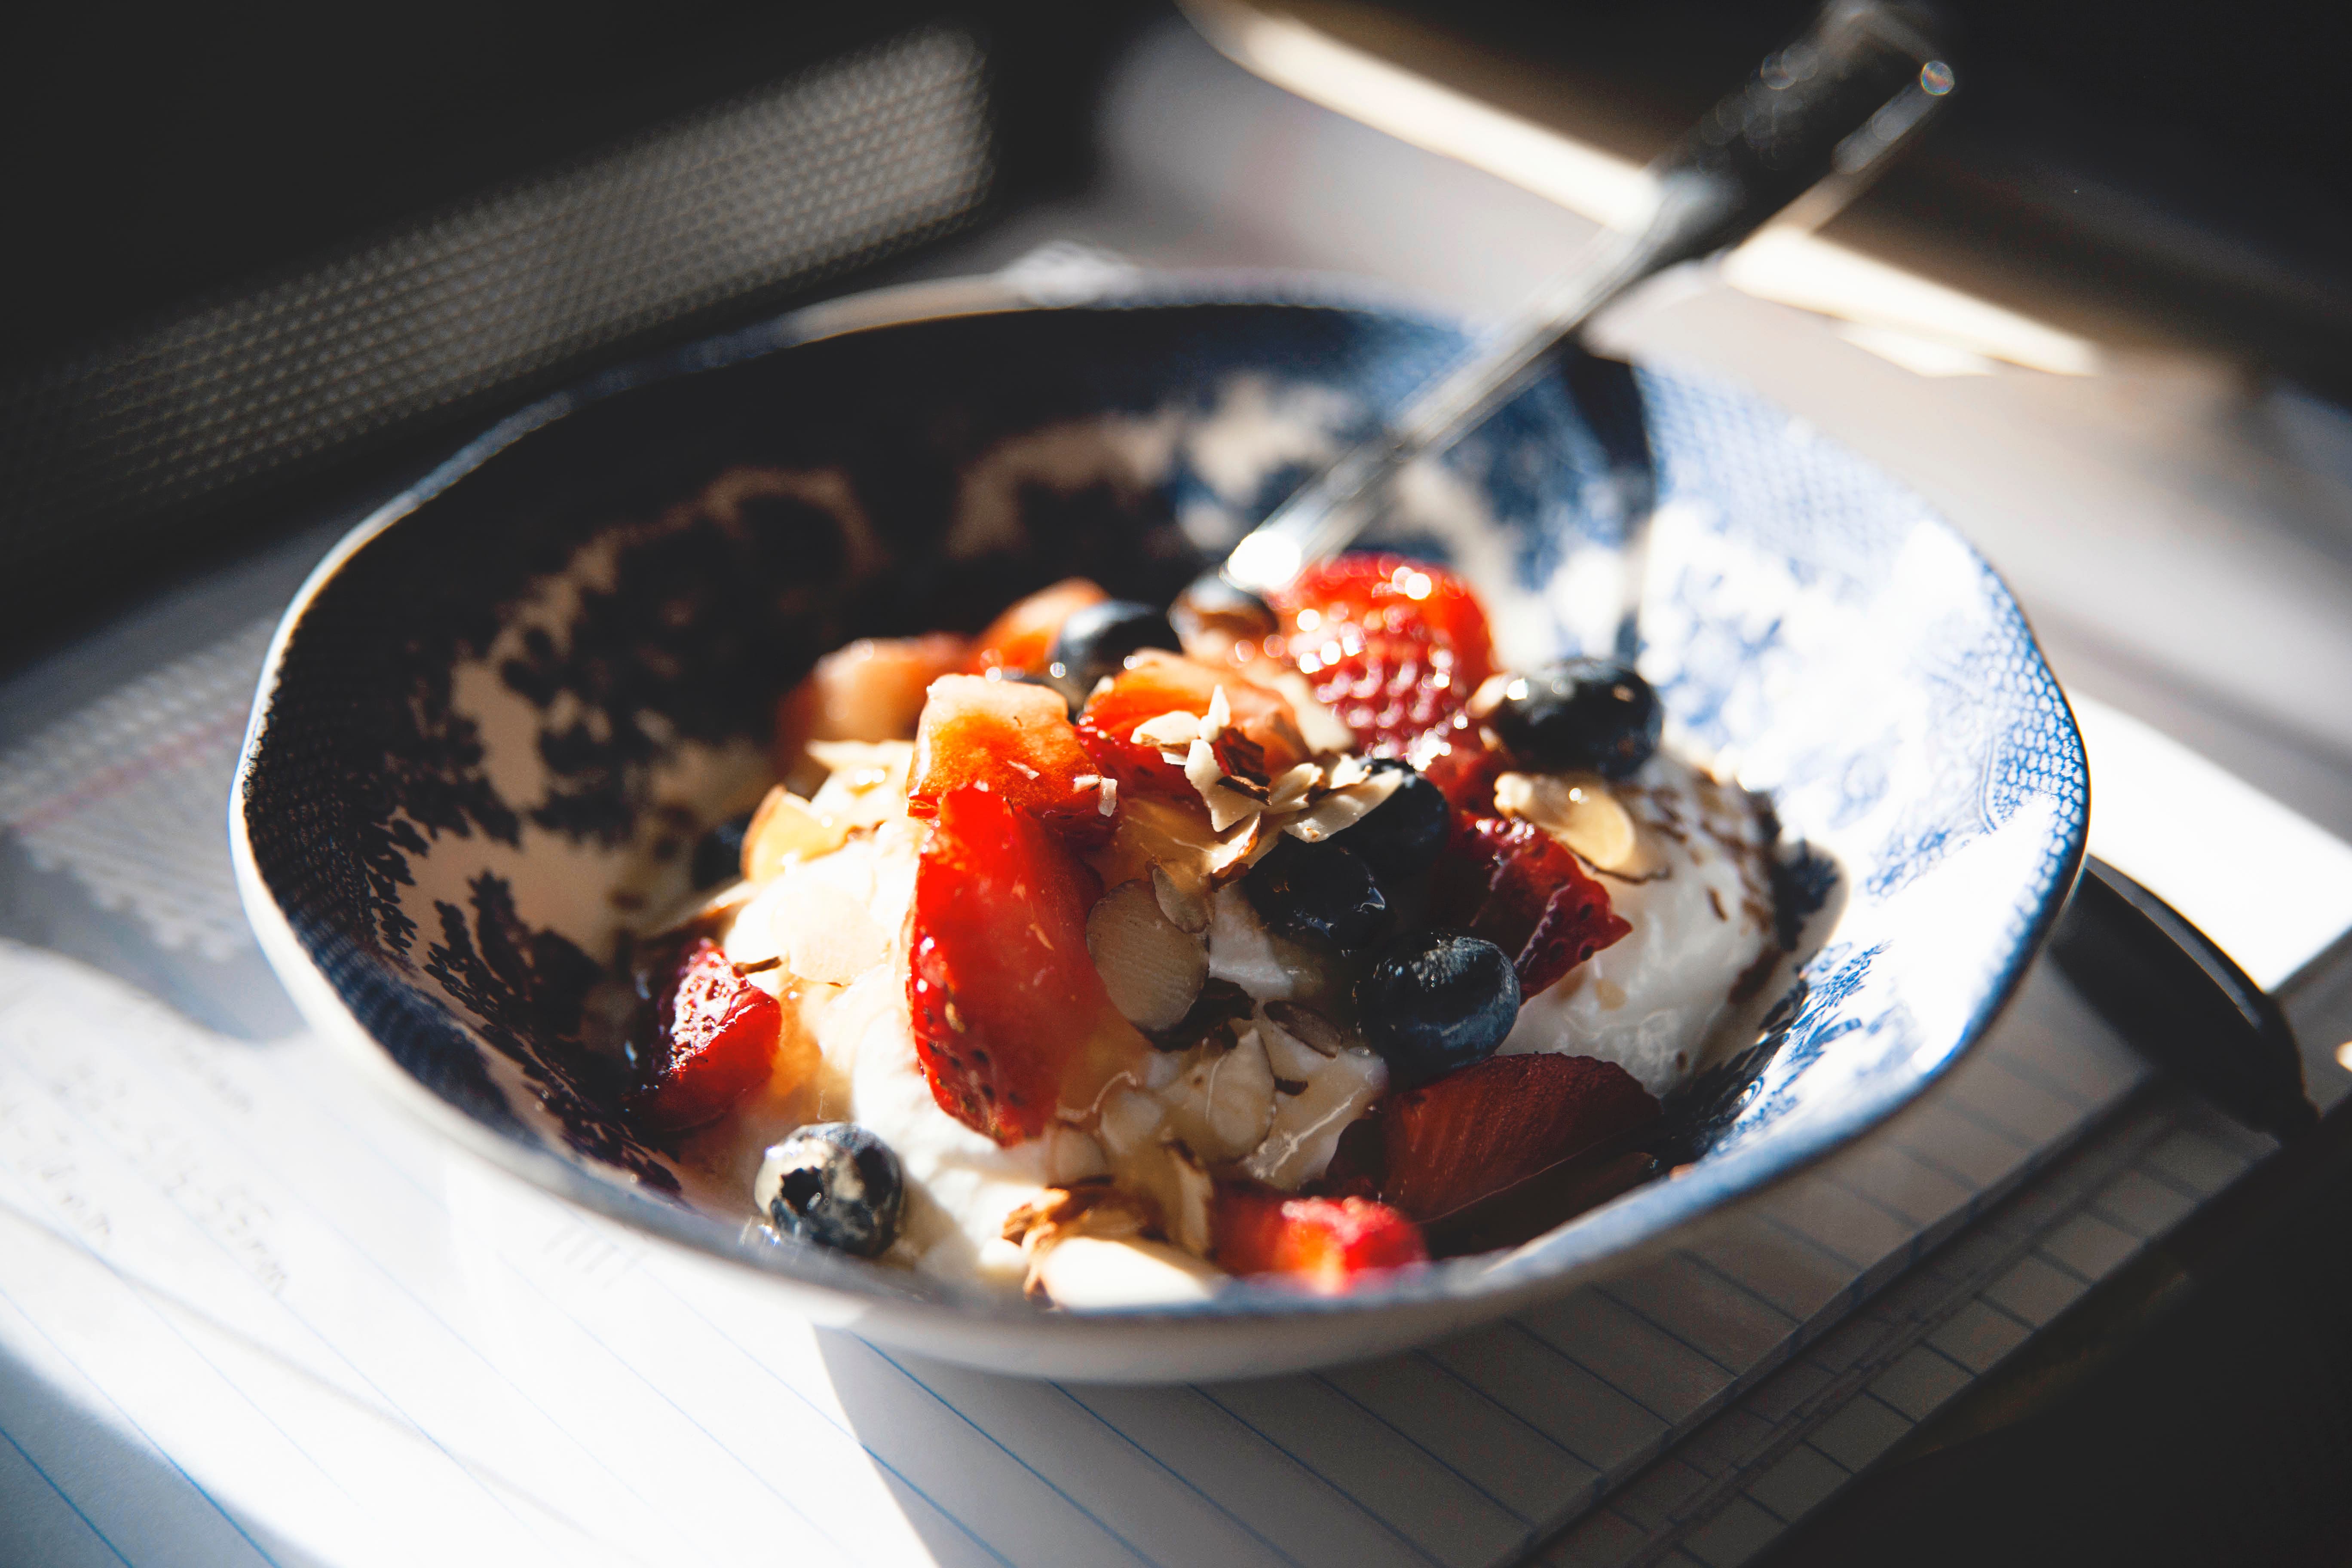 Have a bowl of yogurt with fresh berries for breakfast.